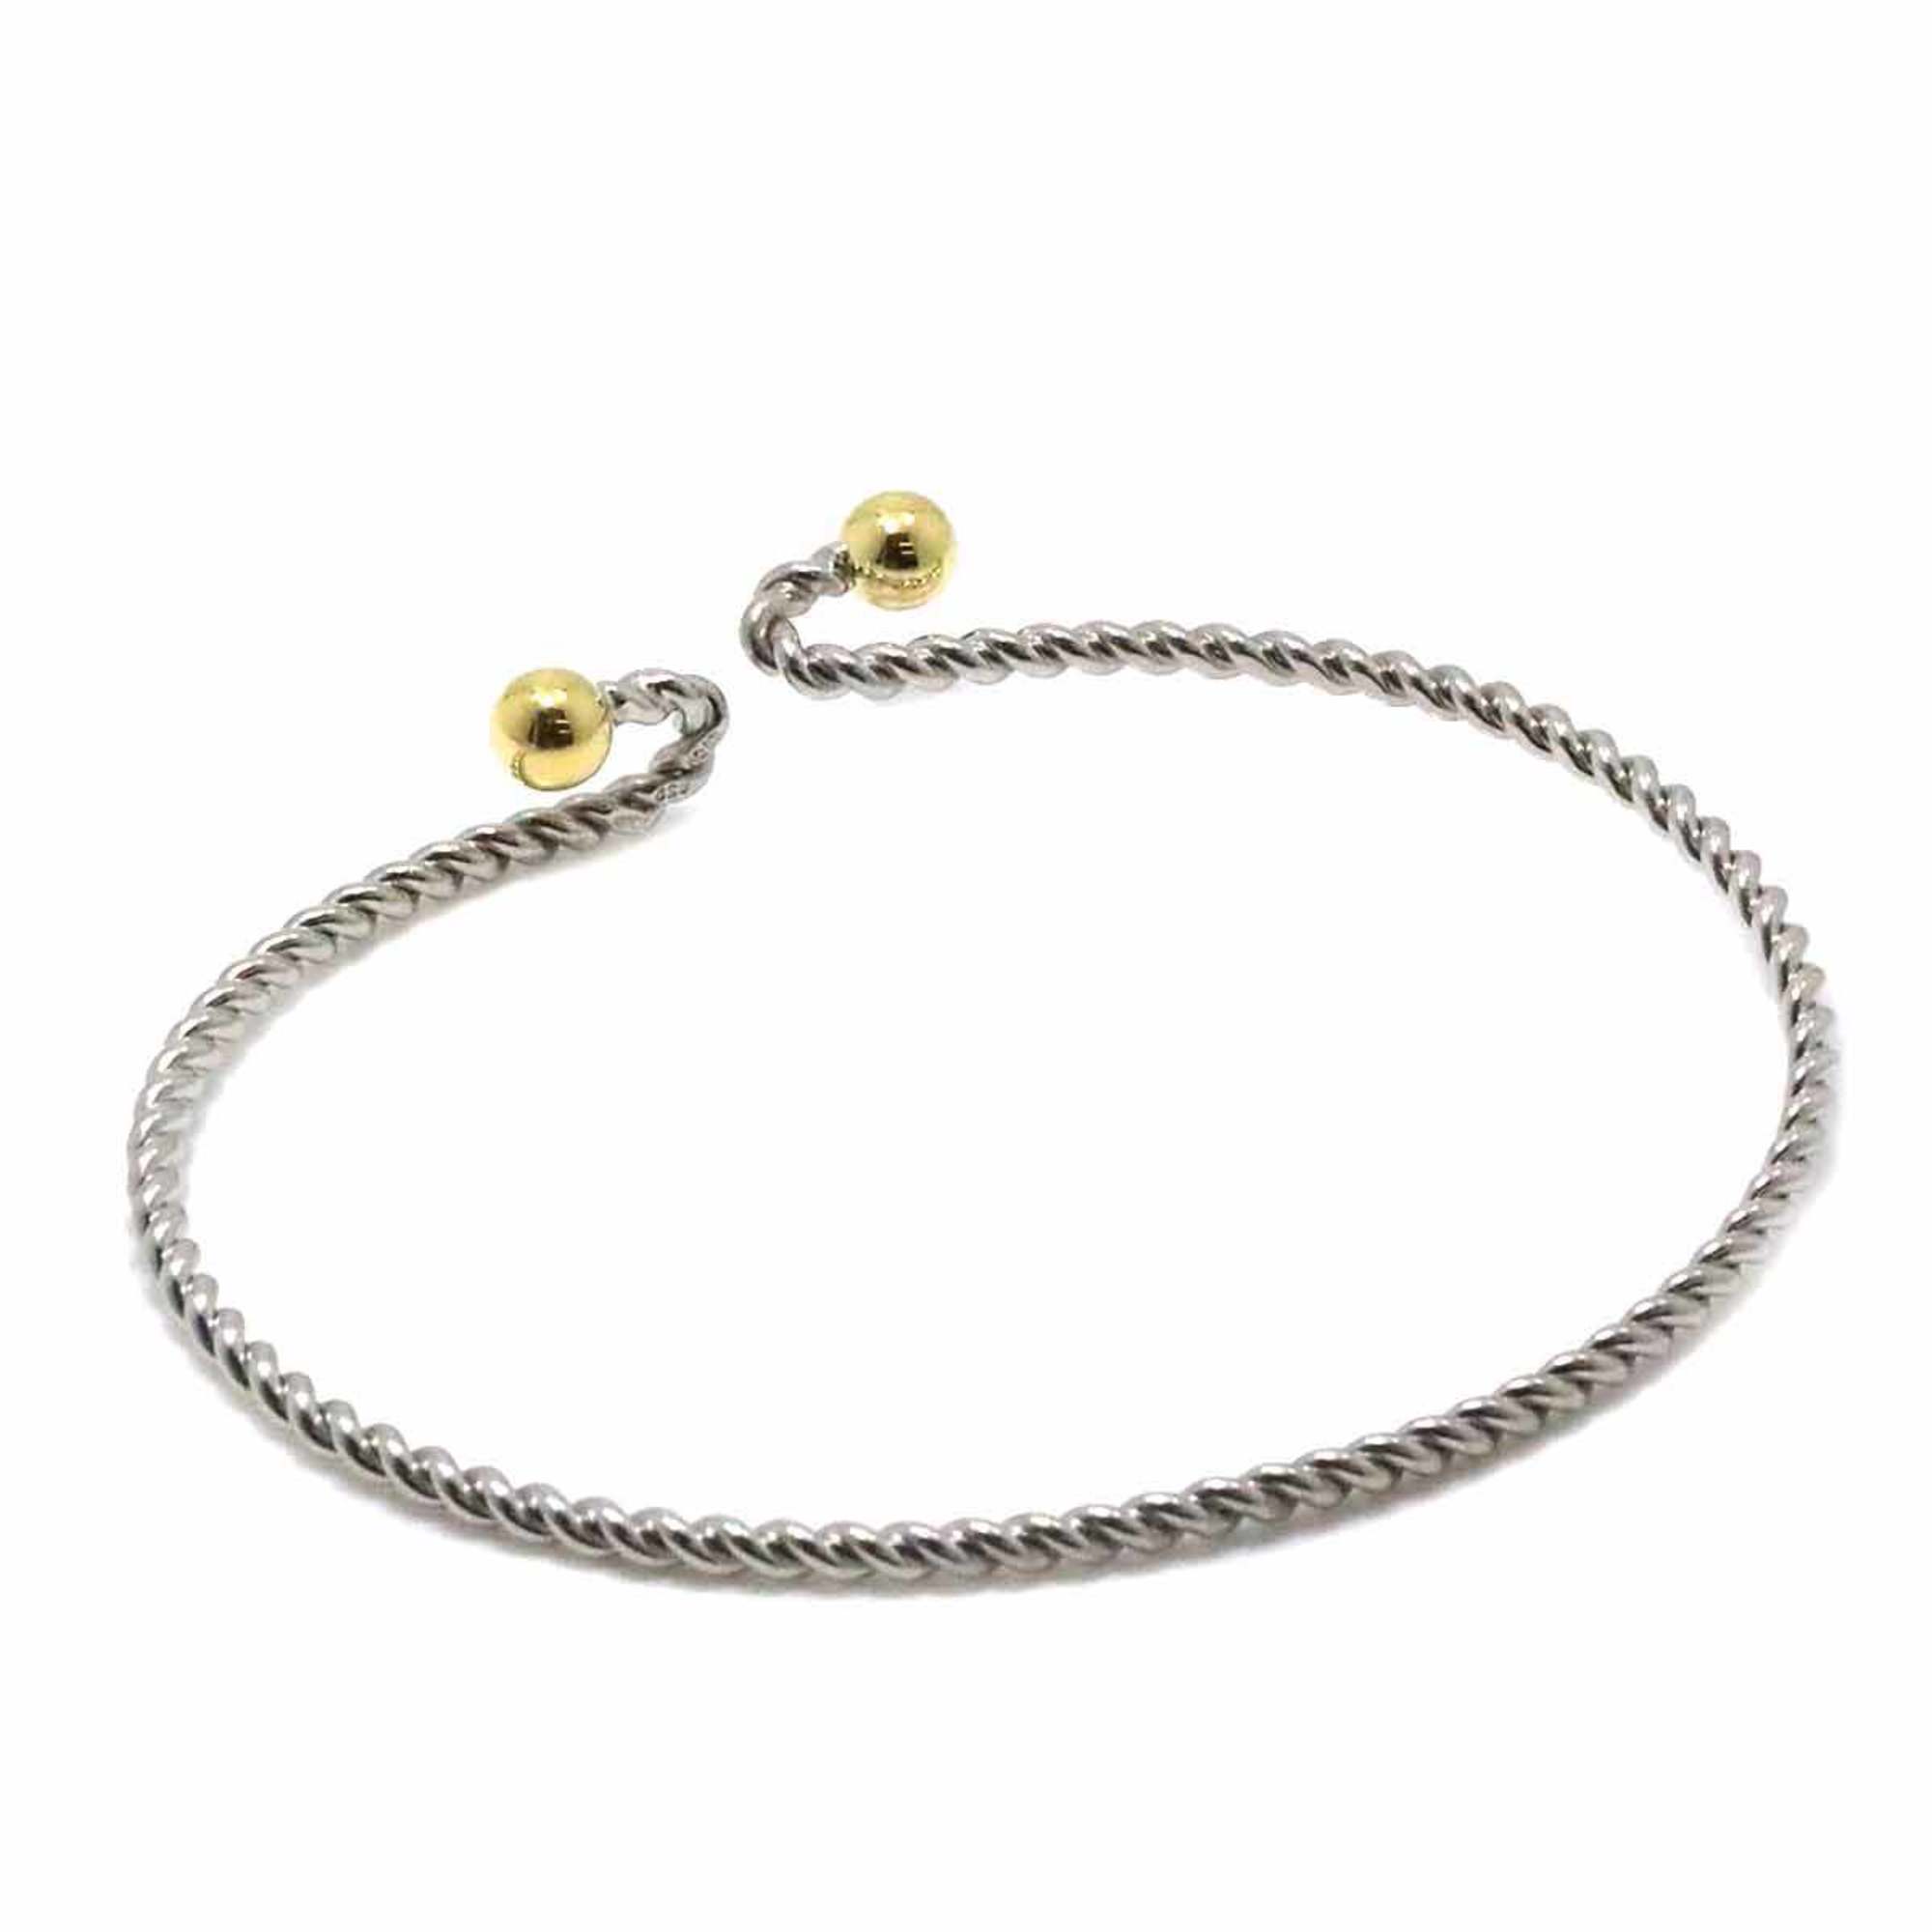 Tiffany & Co. Twisted Wire Bangle 17cm K18 YG Yellow Gold 750 SV Silver 925